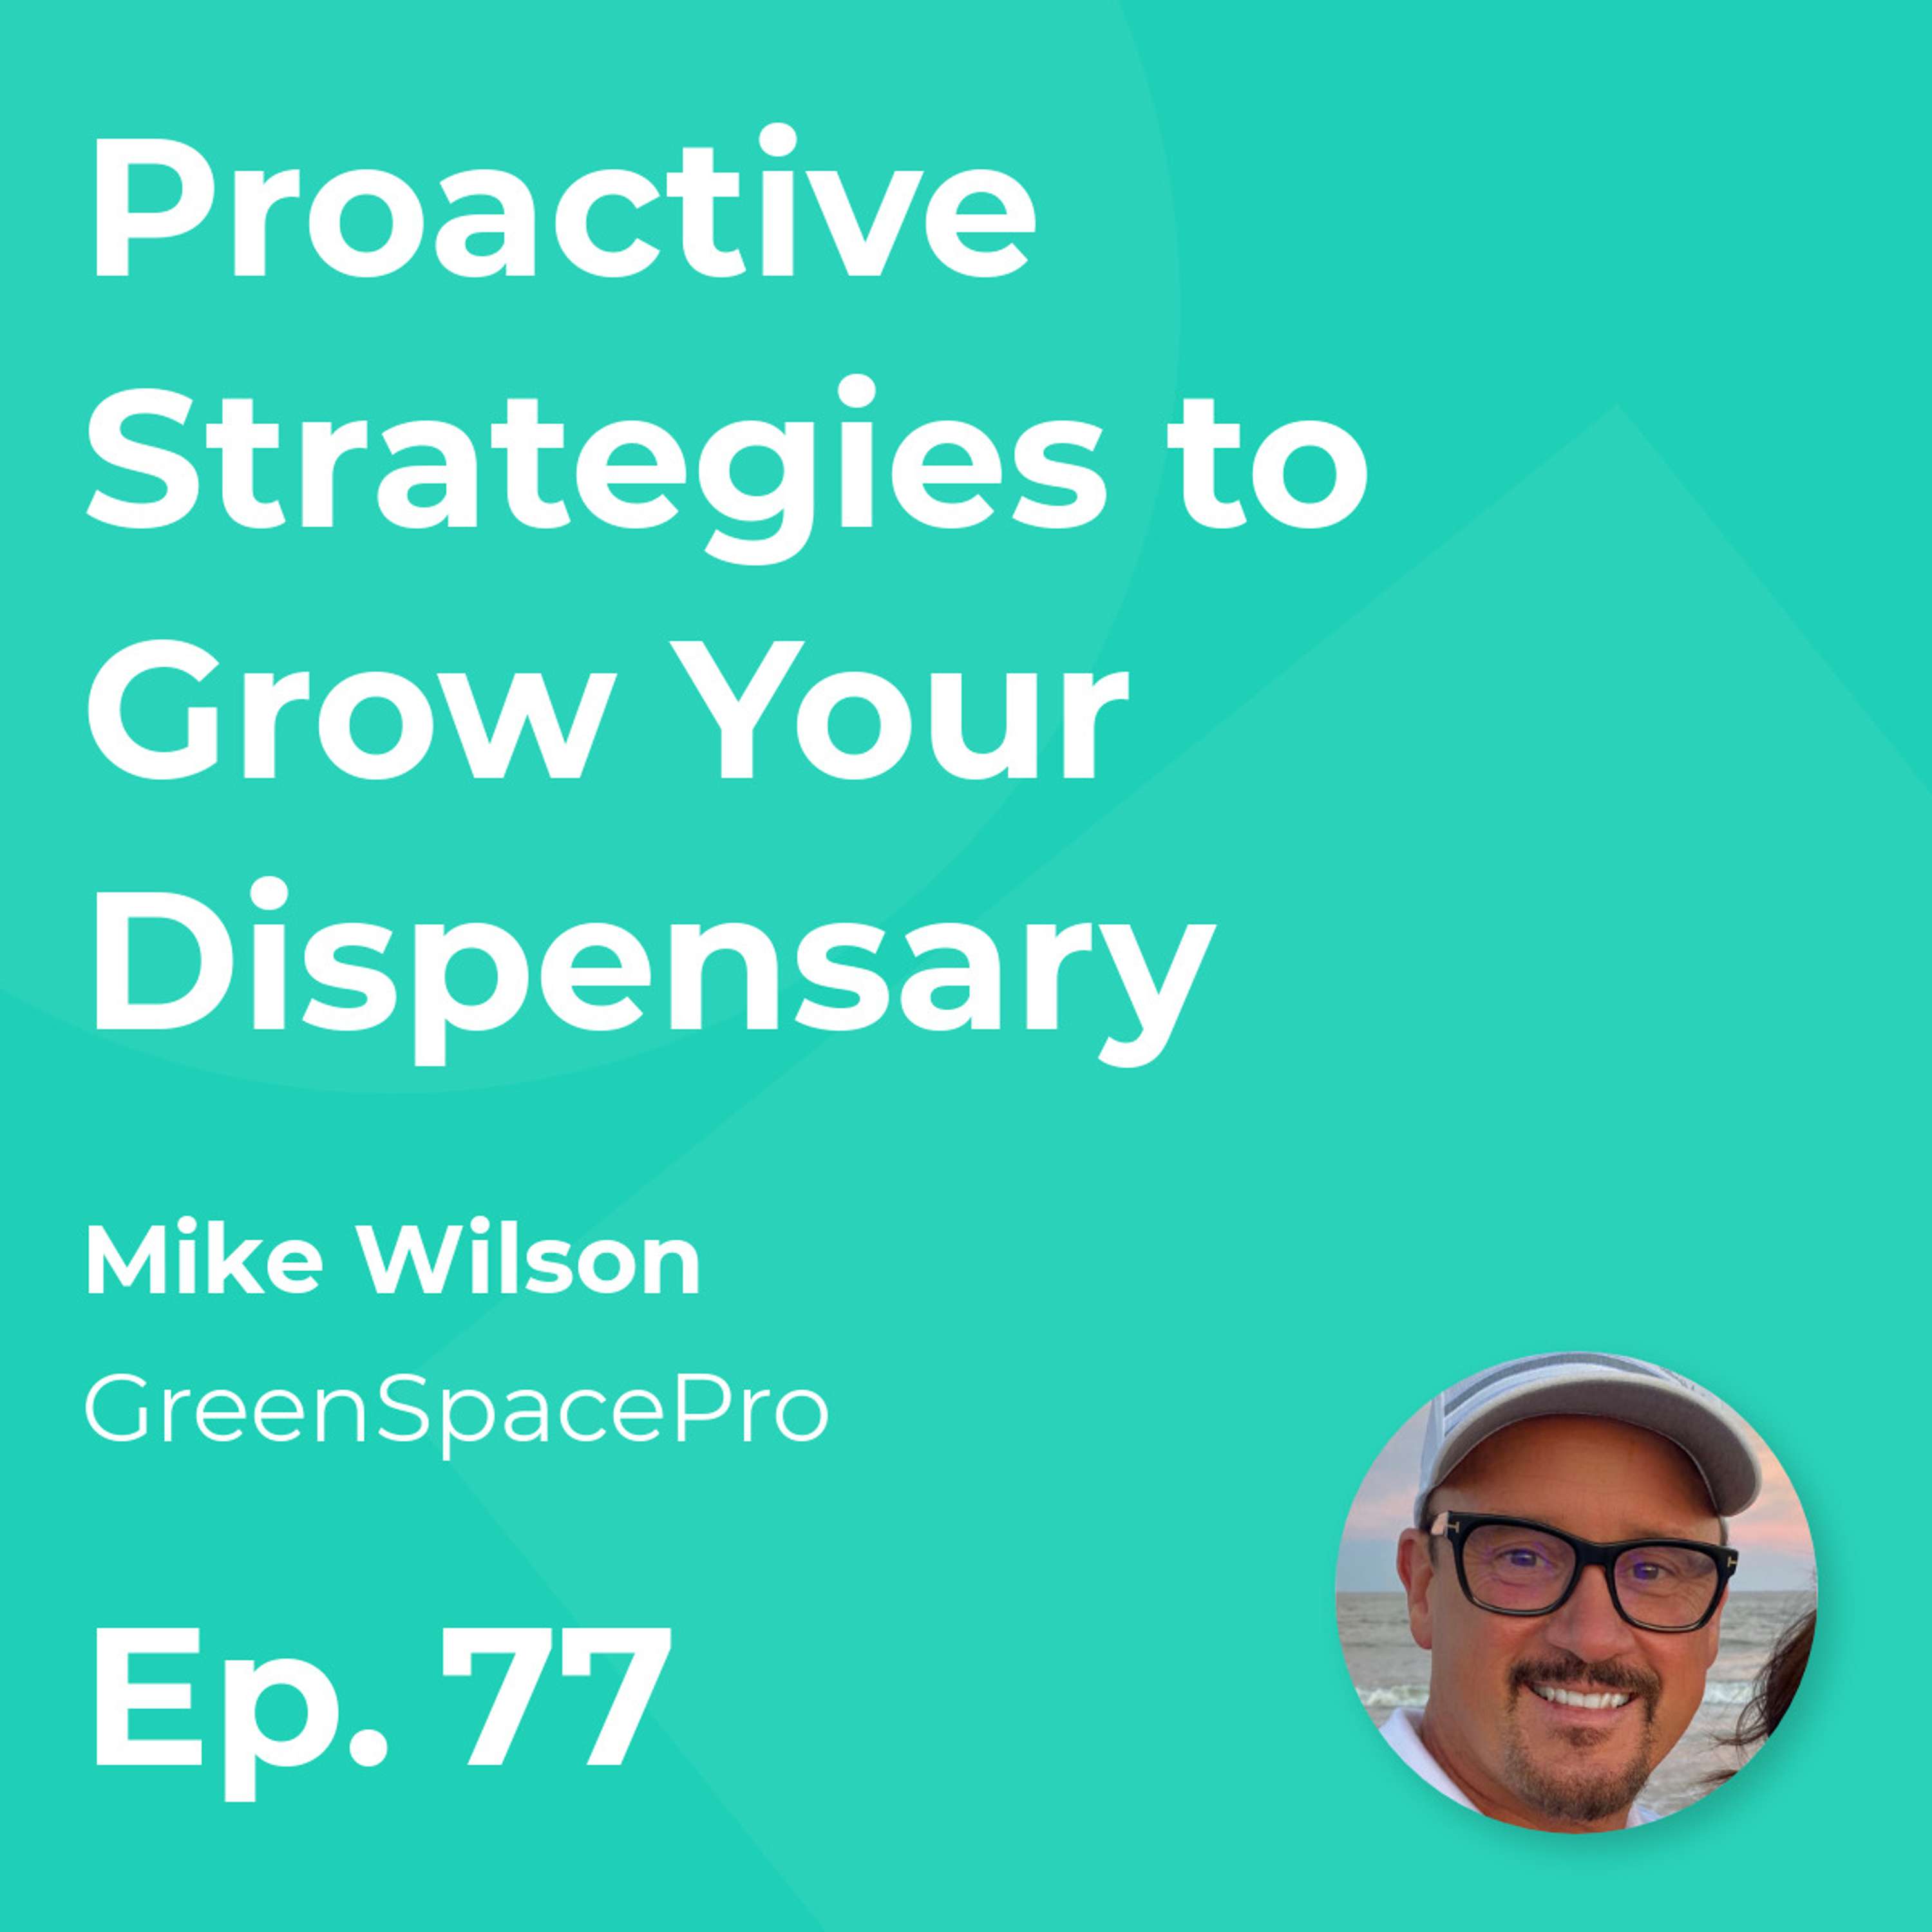 Proactive Strategies to Grow Your Dispensary with Mike Wilson (GreenSpacePro)